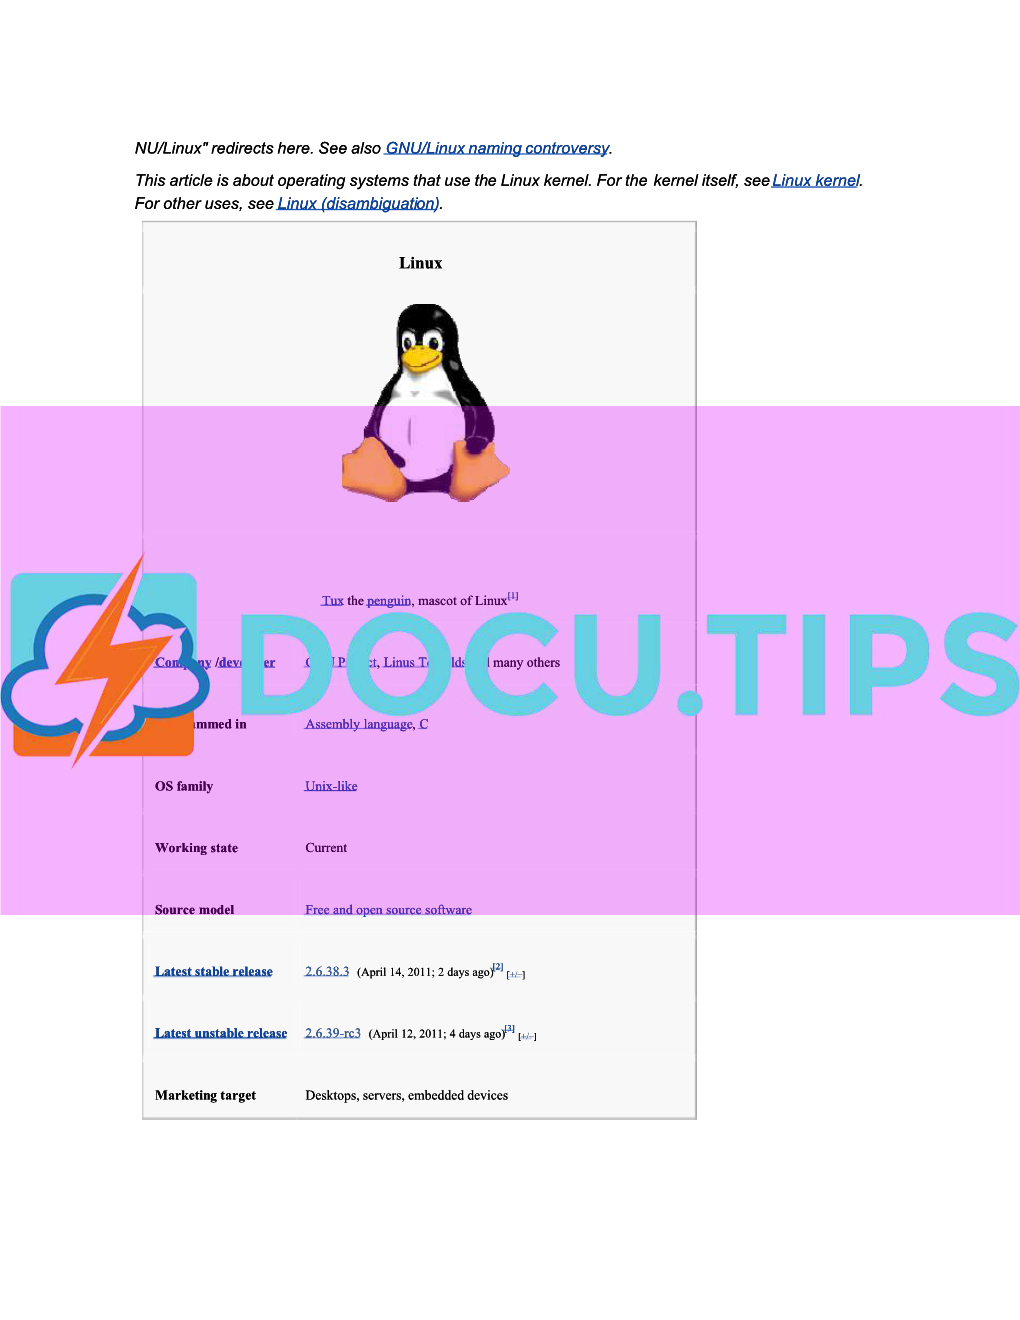 NU/Linux" Redirects Here. See Also GNU/Linux Naming Controversy